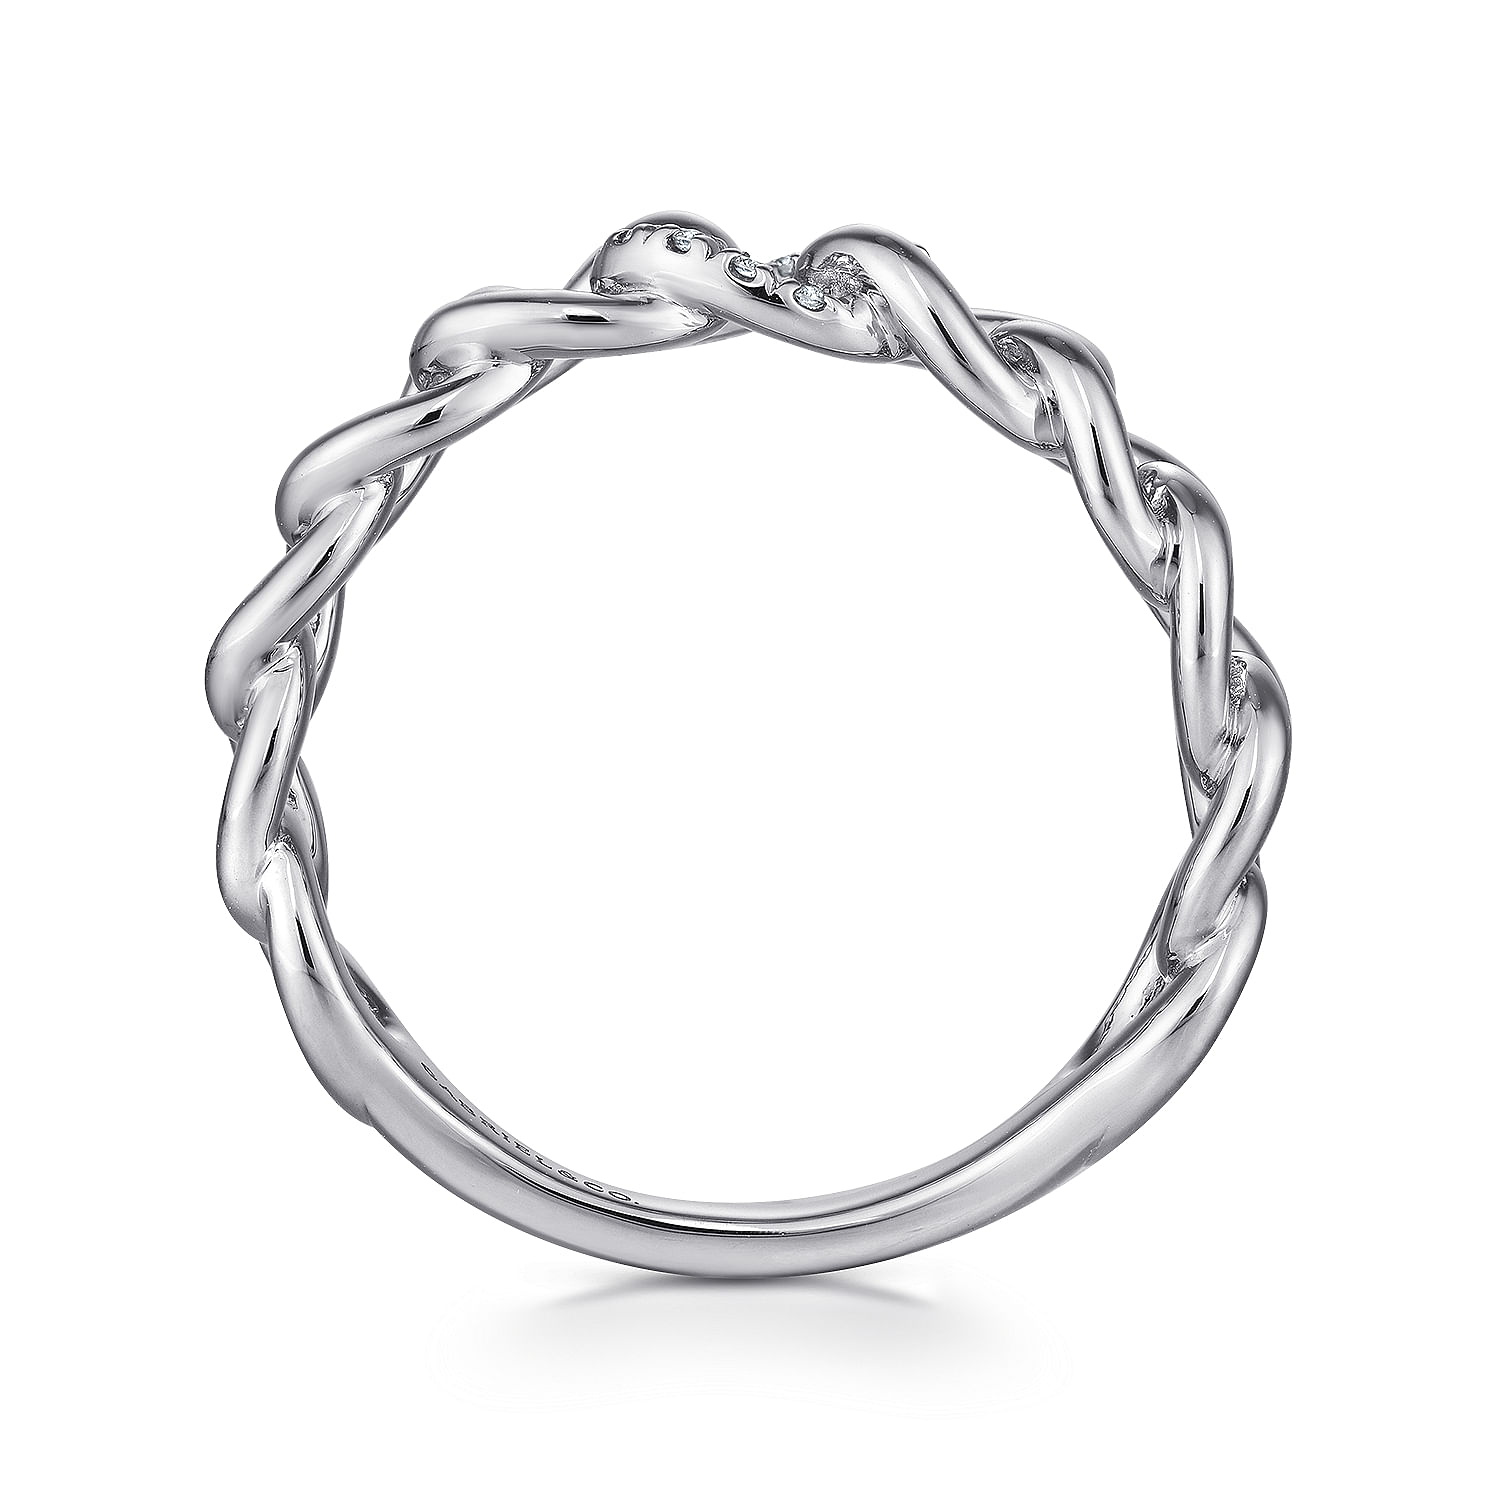 14K White Gold Chain Link Ring Band with Pavé Diamond Station